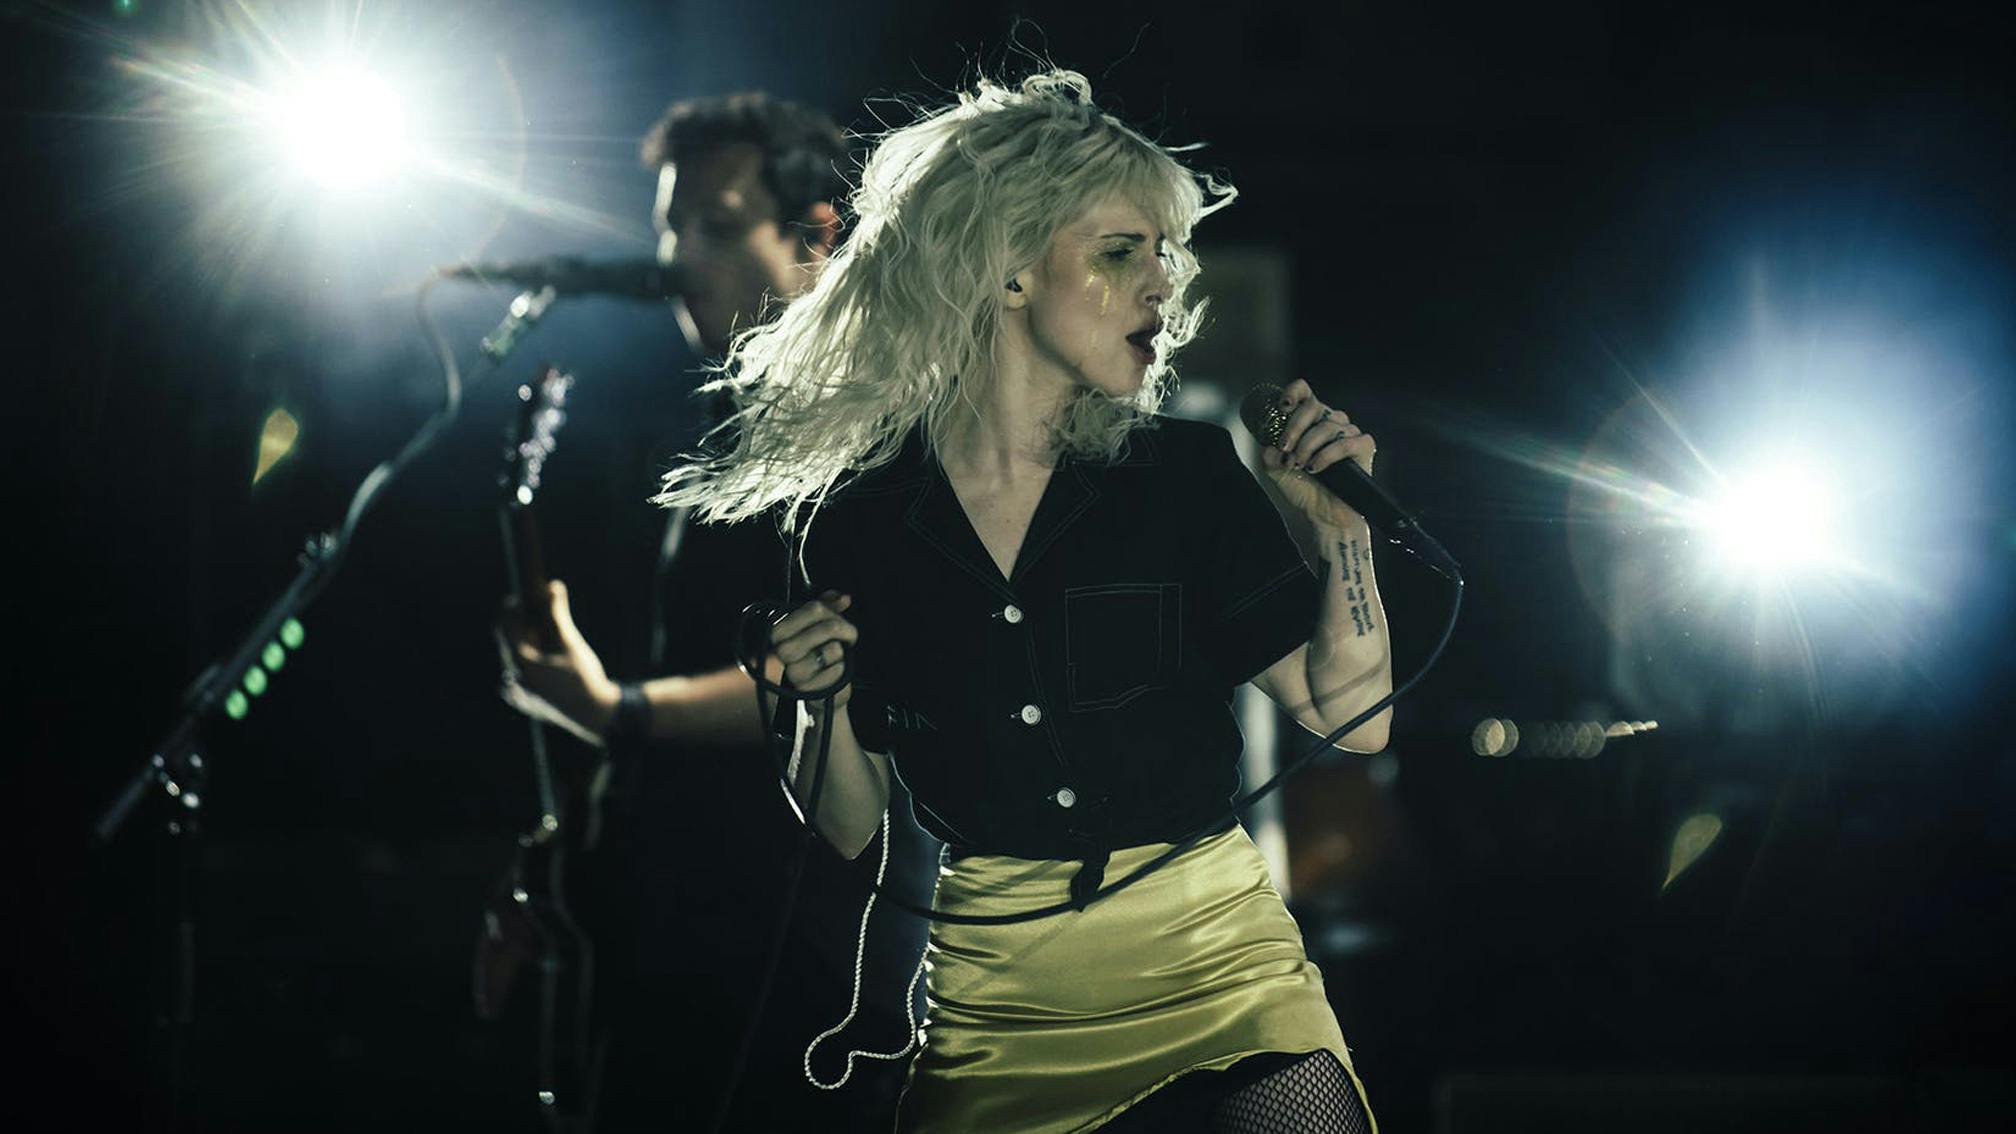 Paramore to donate portion of tour proceeds to reproductive care and abortion services